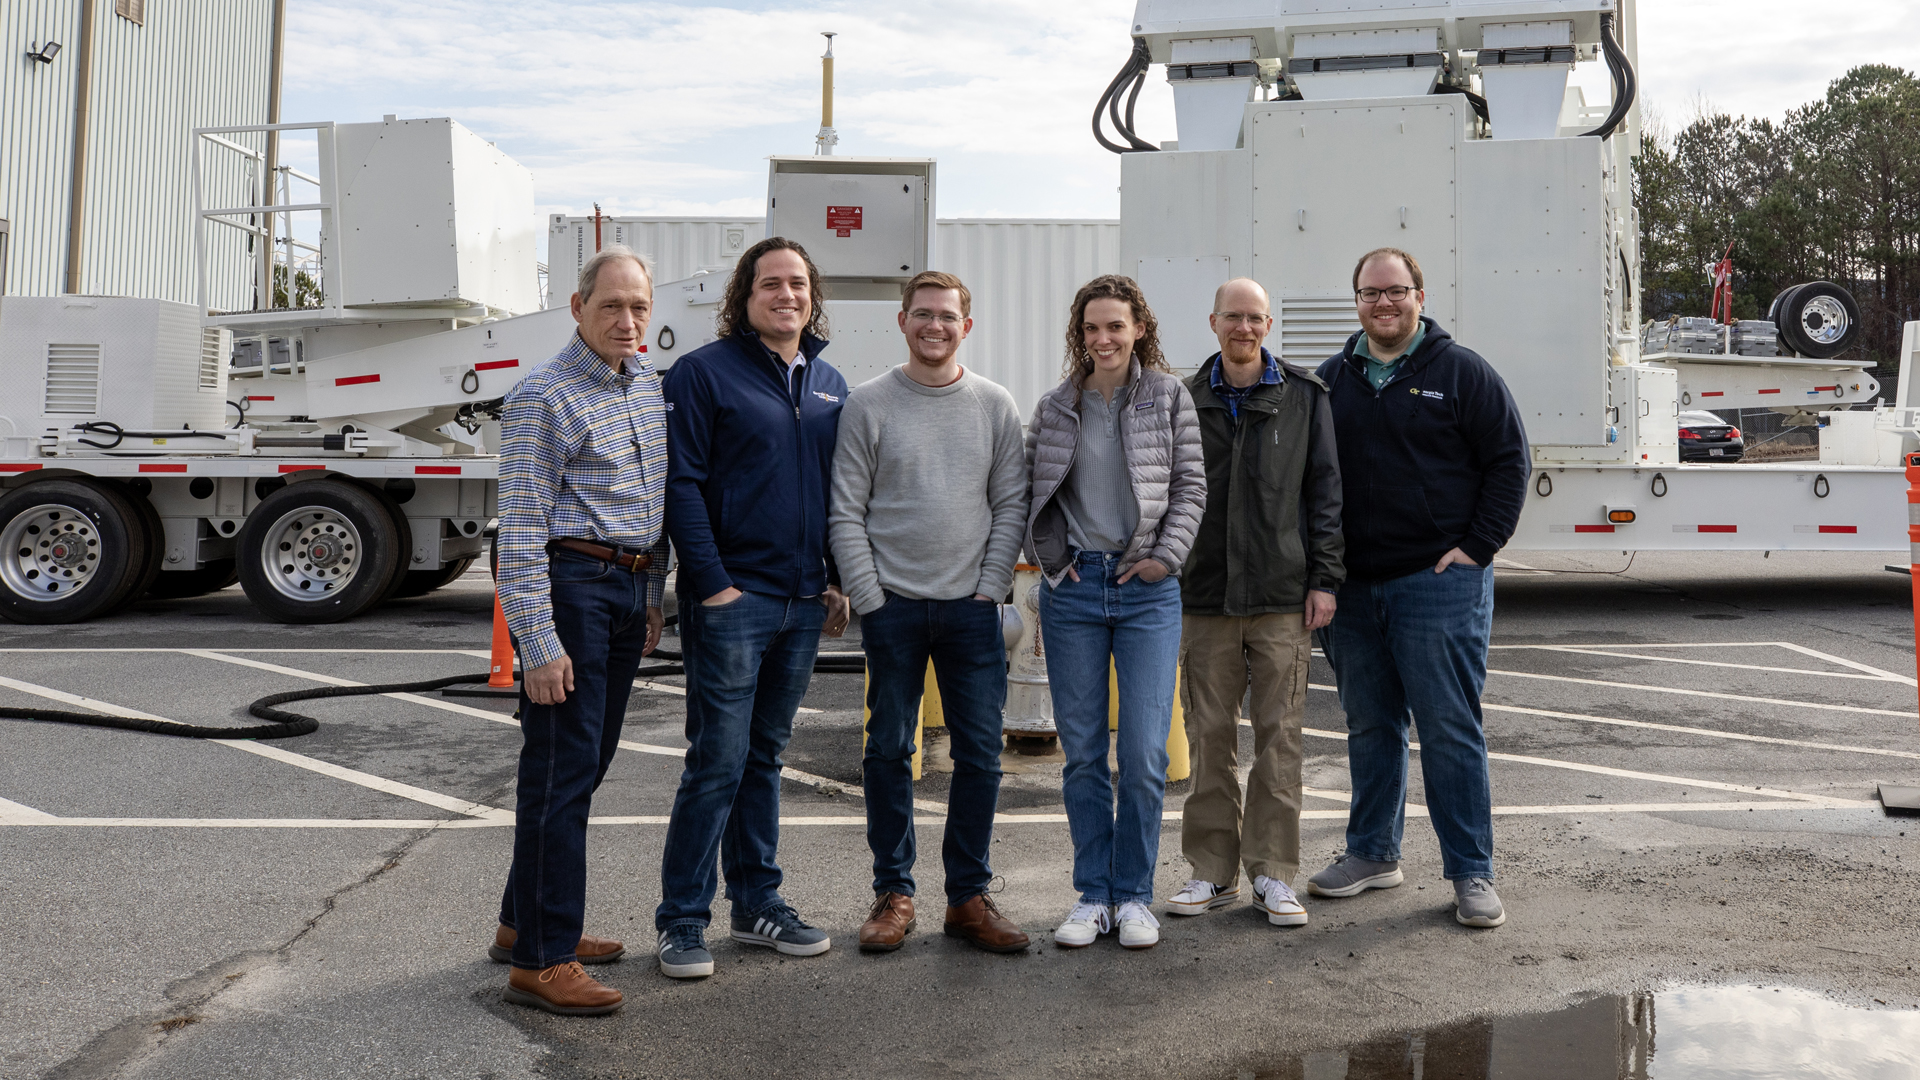 Five male researchers and one female researcher stand in front of the ARTS-V1 system.